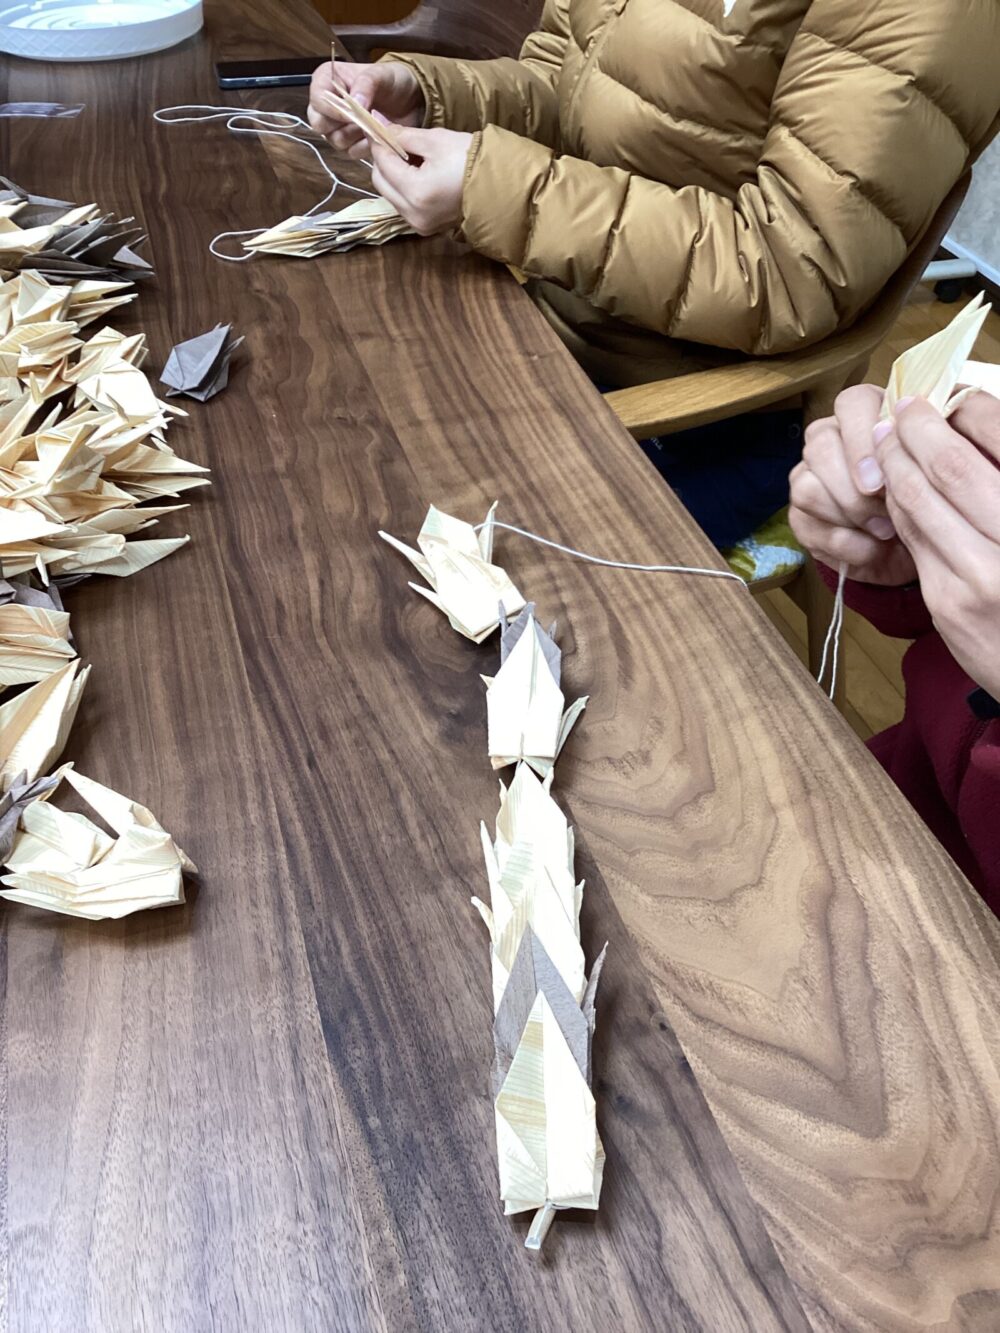 Thousand paper cranes project with wooden origami2